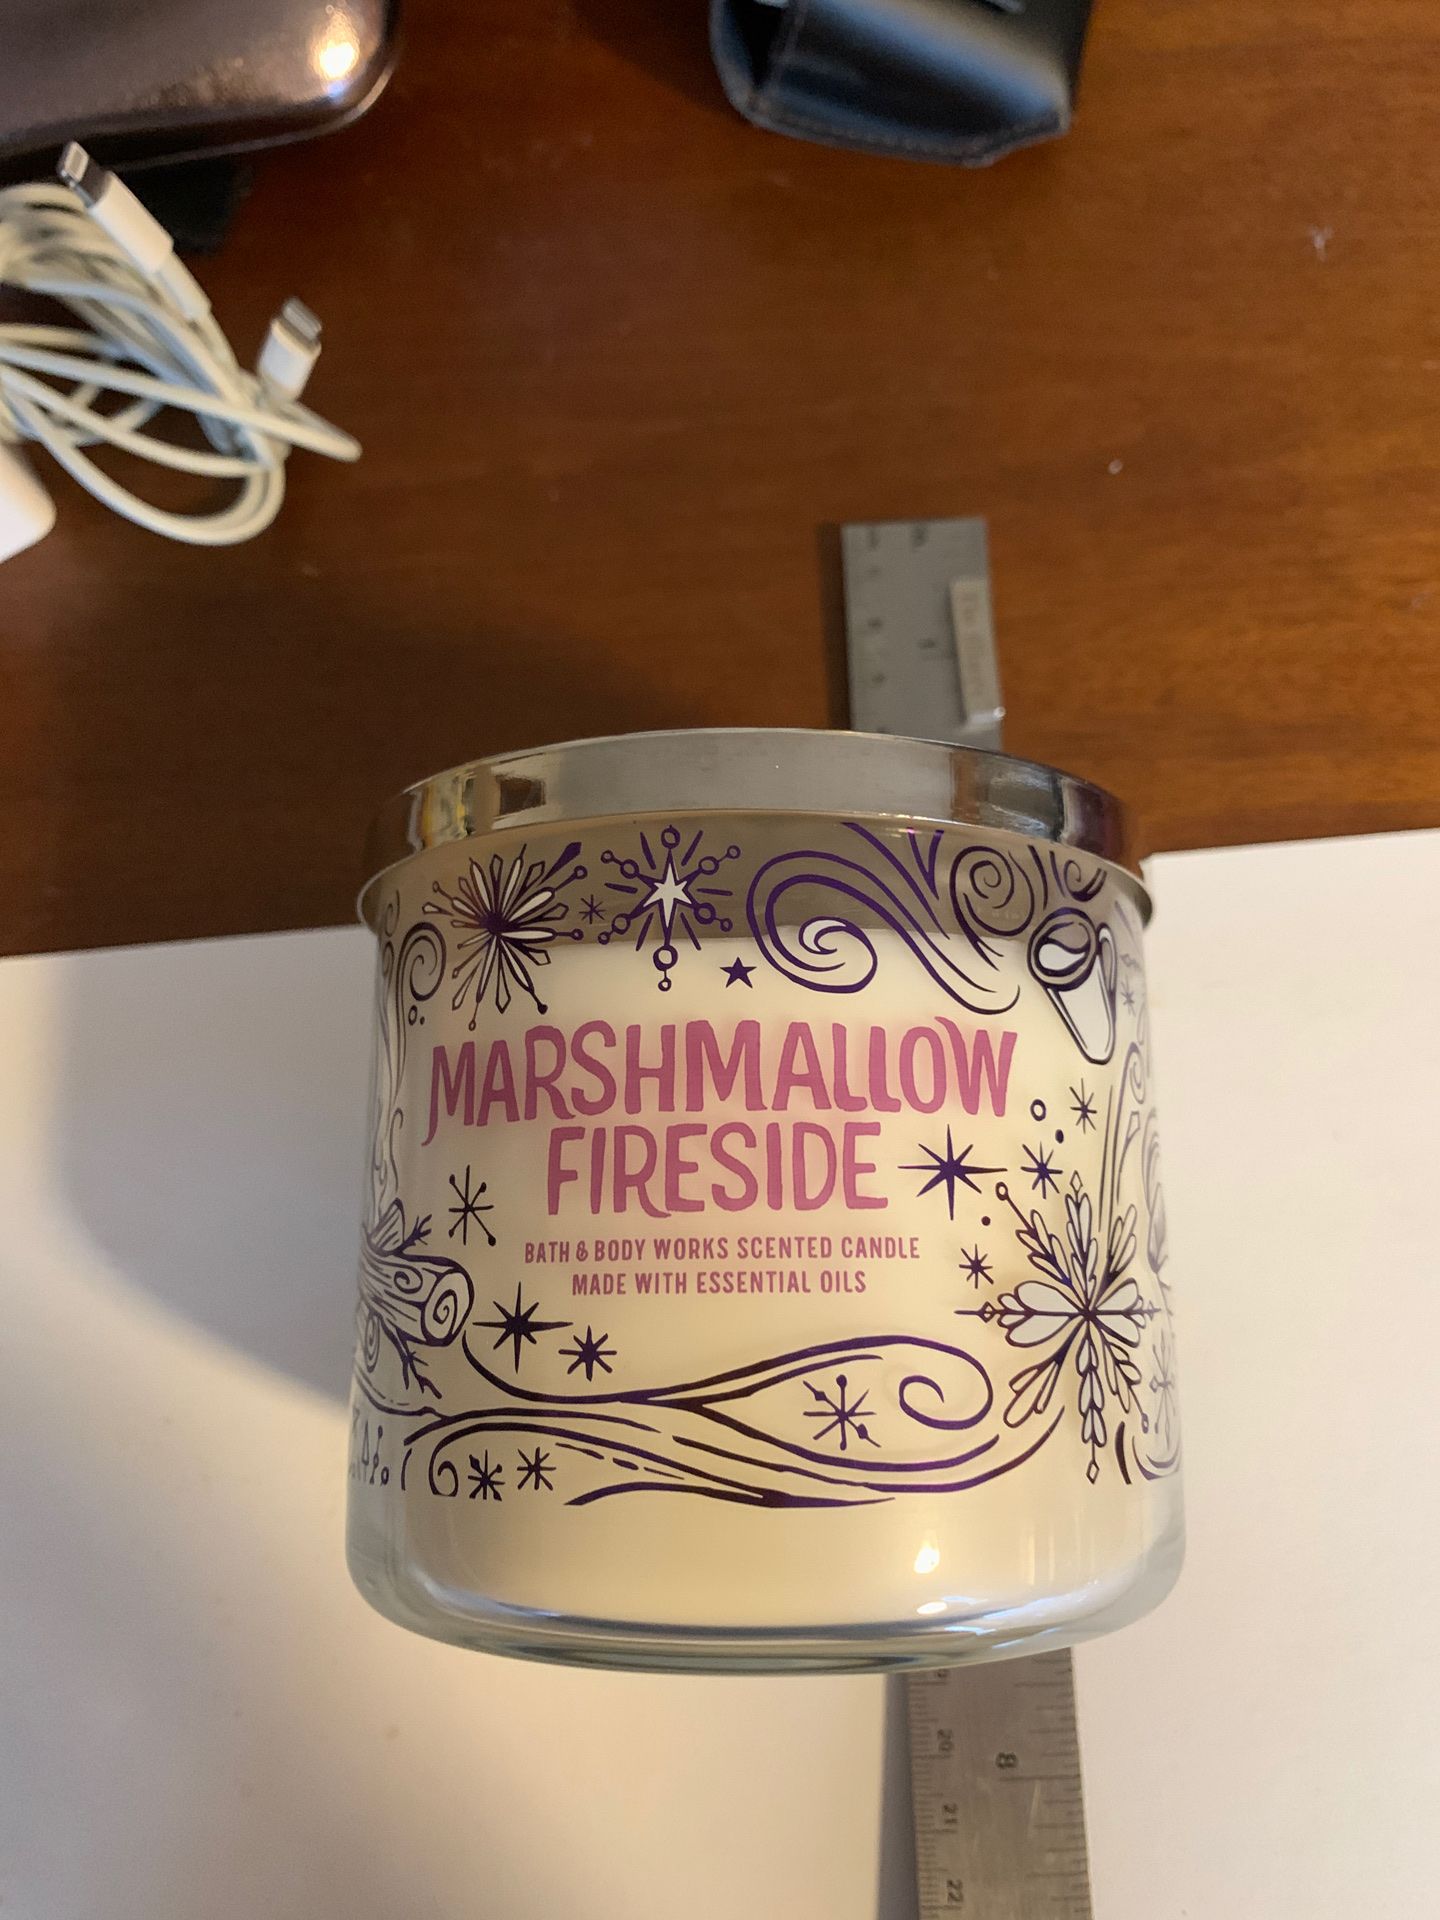 Marshmallow Fireside Candle from BATH AND BODYWORKS.